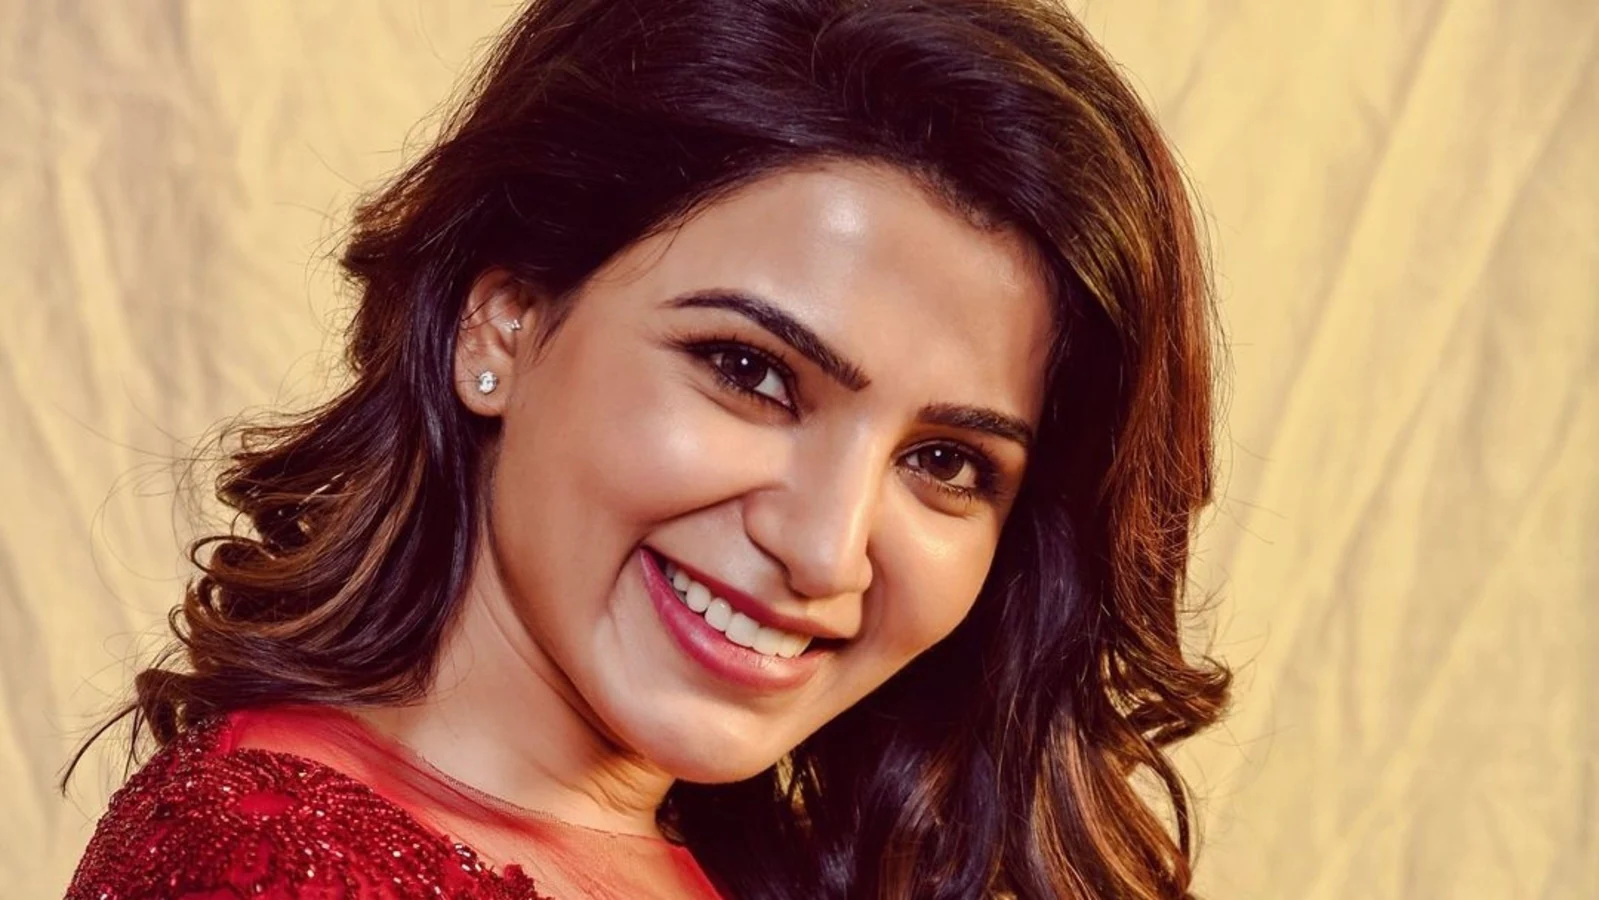 Samantha tweets about expiry date does it is for naga chaitanya second marriage